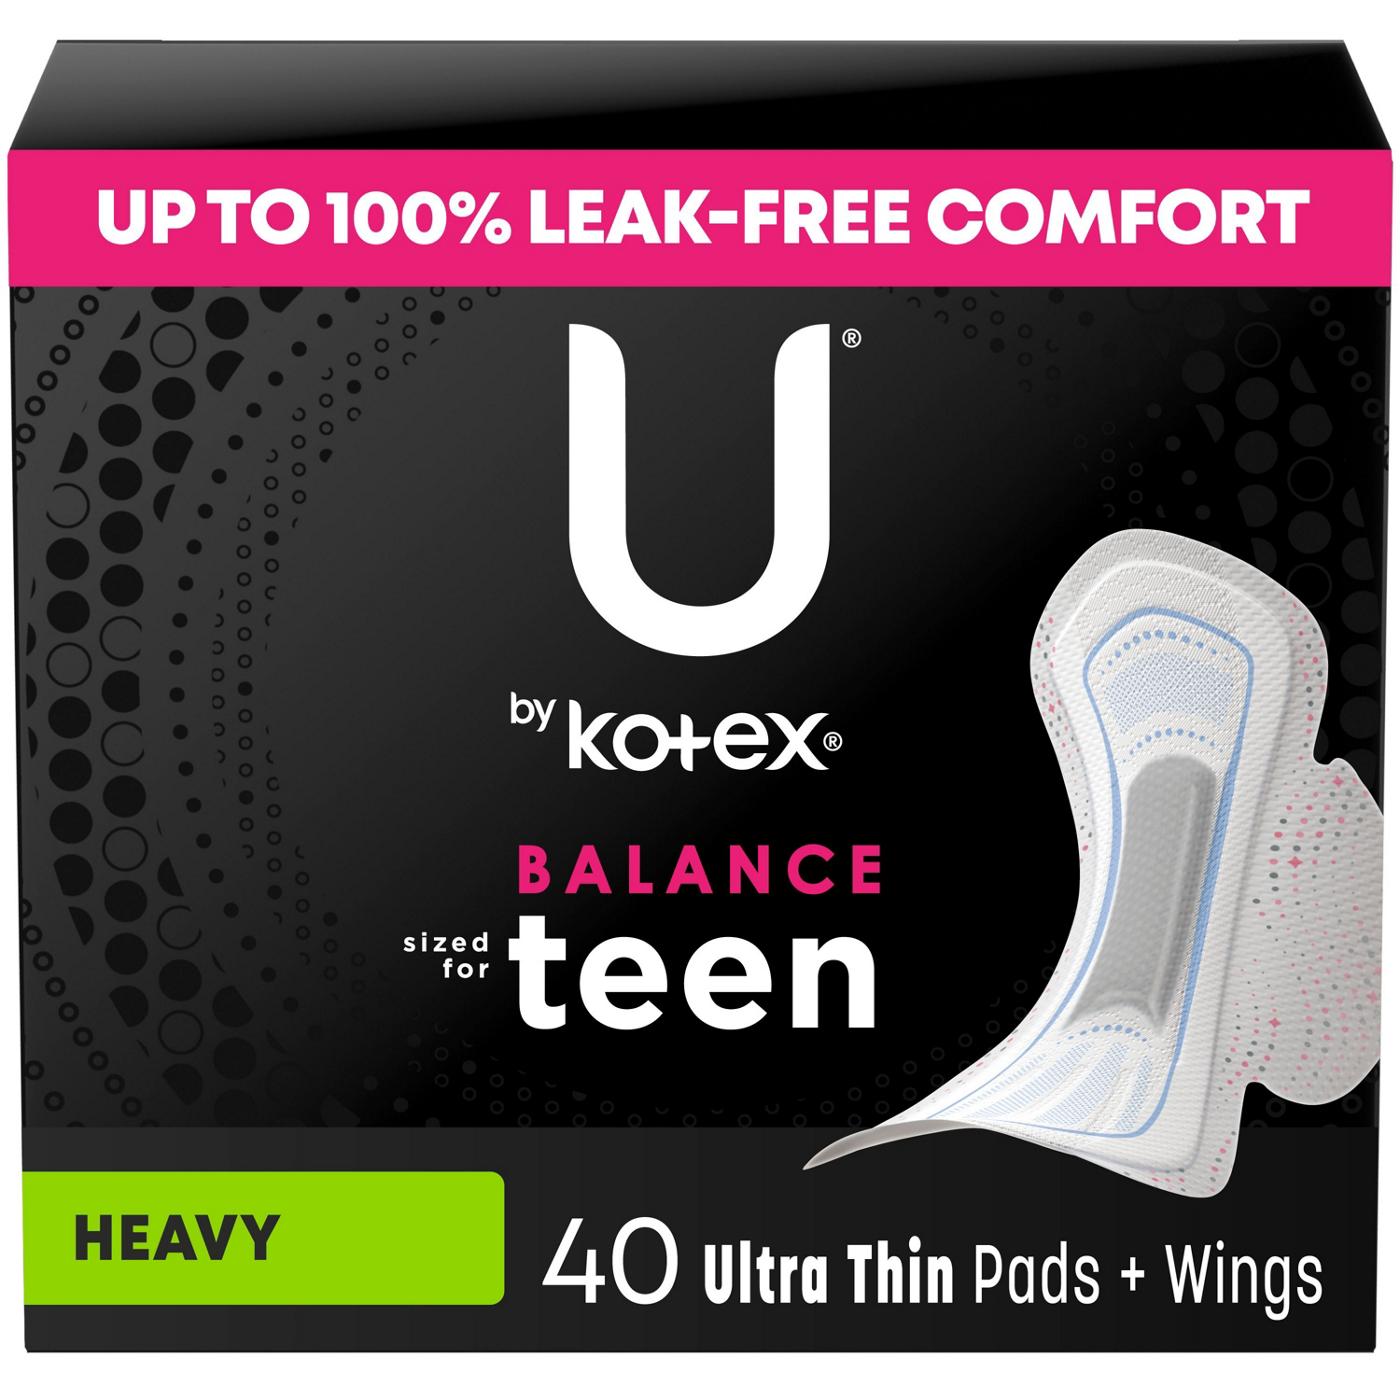 U by Kotex Balance - Sized for Teens Ultra Thin Pads with Wings - Heavy Absorbency; image 1 of 7